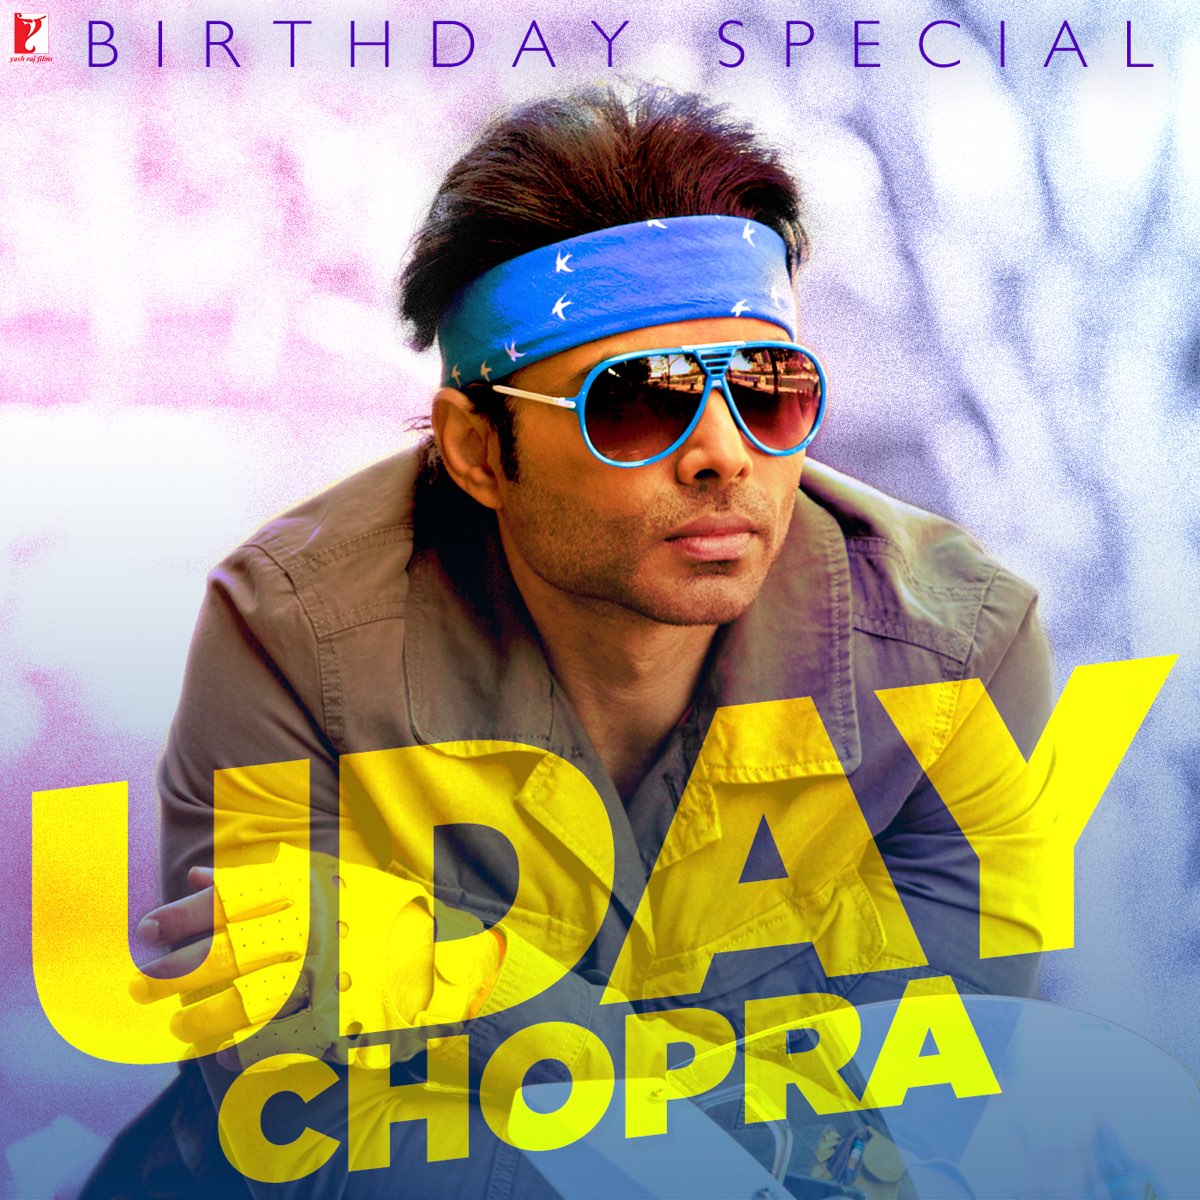 Uday Chopra - Birthday Special by Various Artists on Apple Music